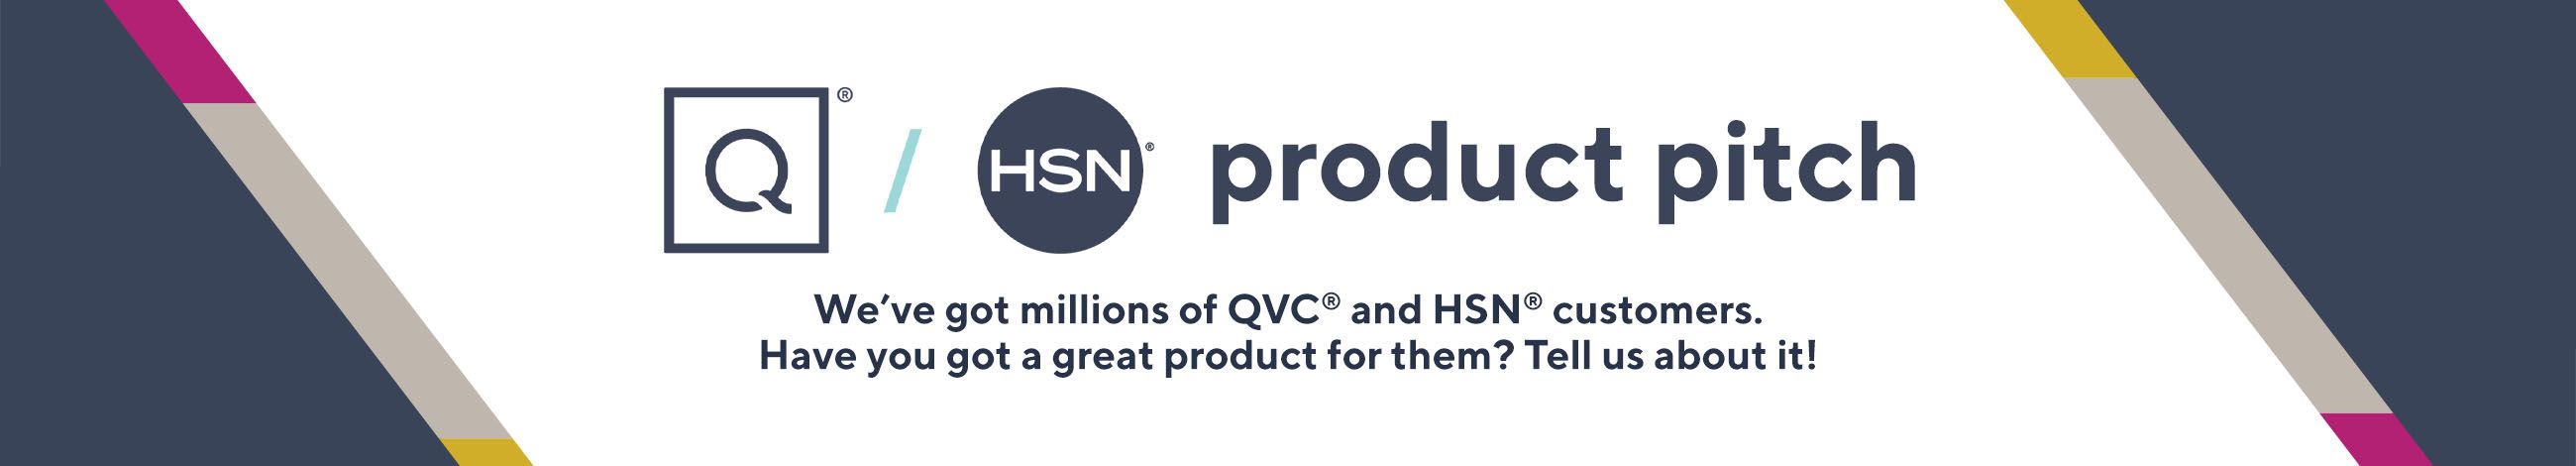 QVC/HSN.  We've got millions of QVC® and HSN® customers. Have you got a great product for them? Tell us about it!